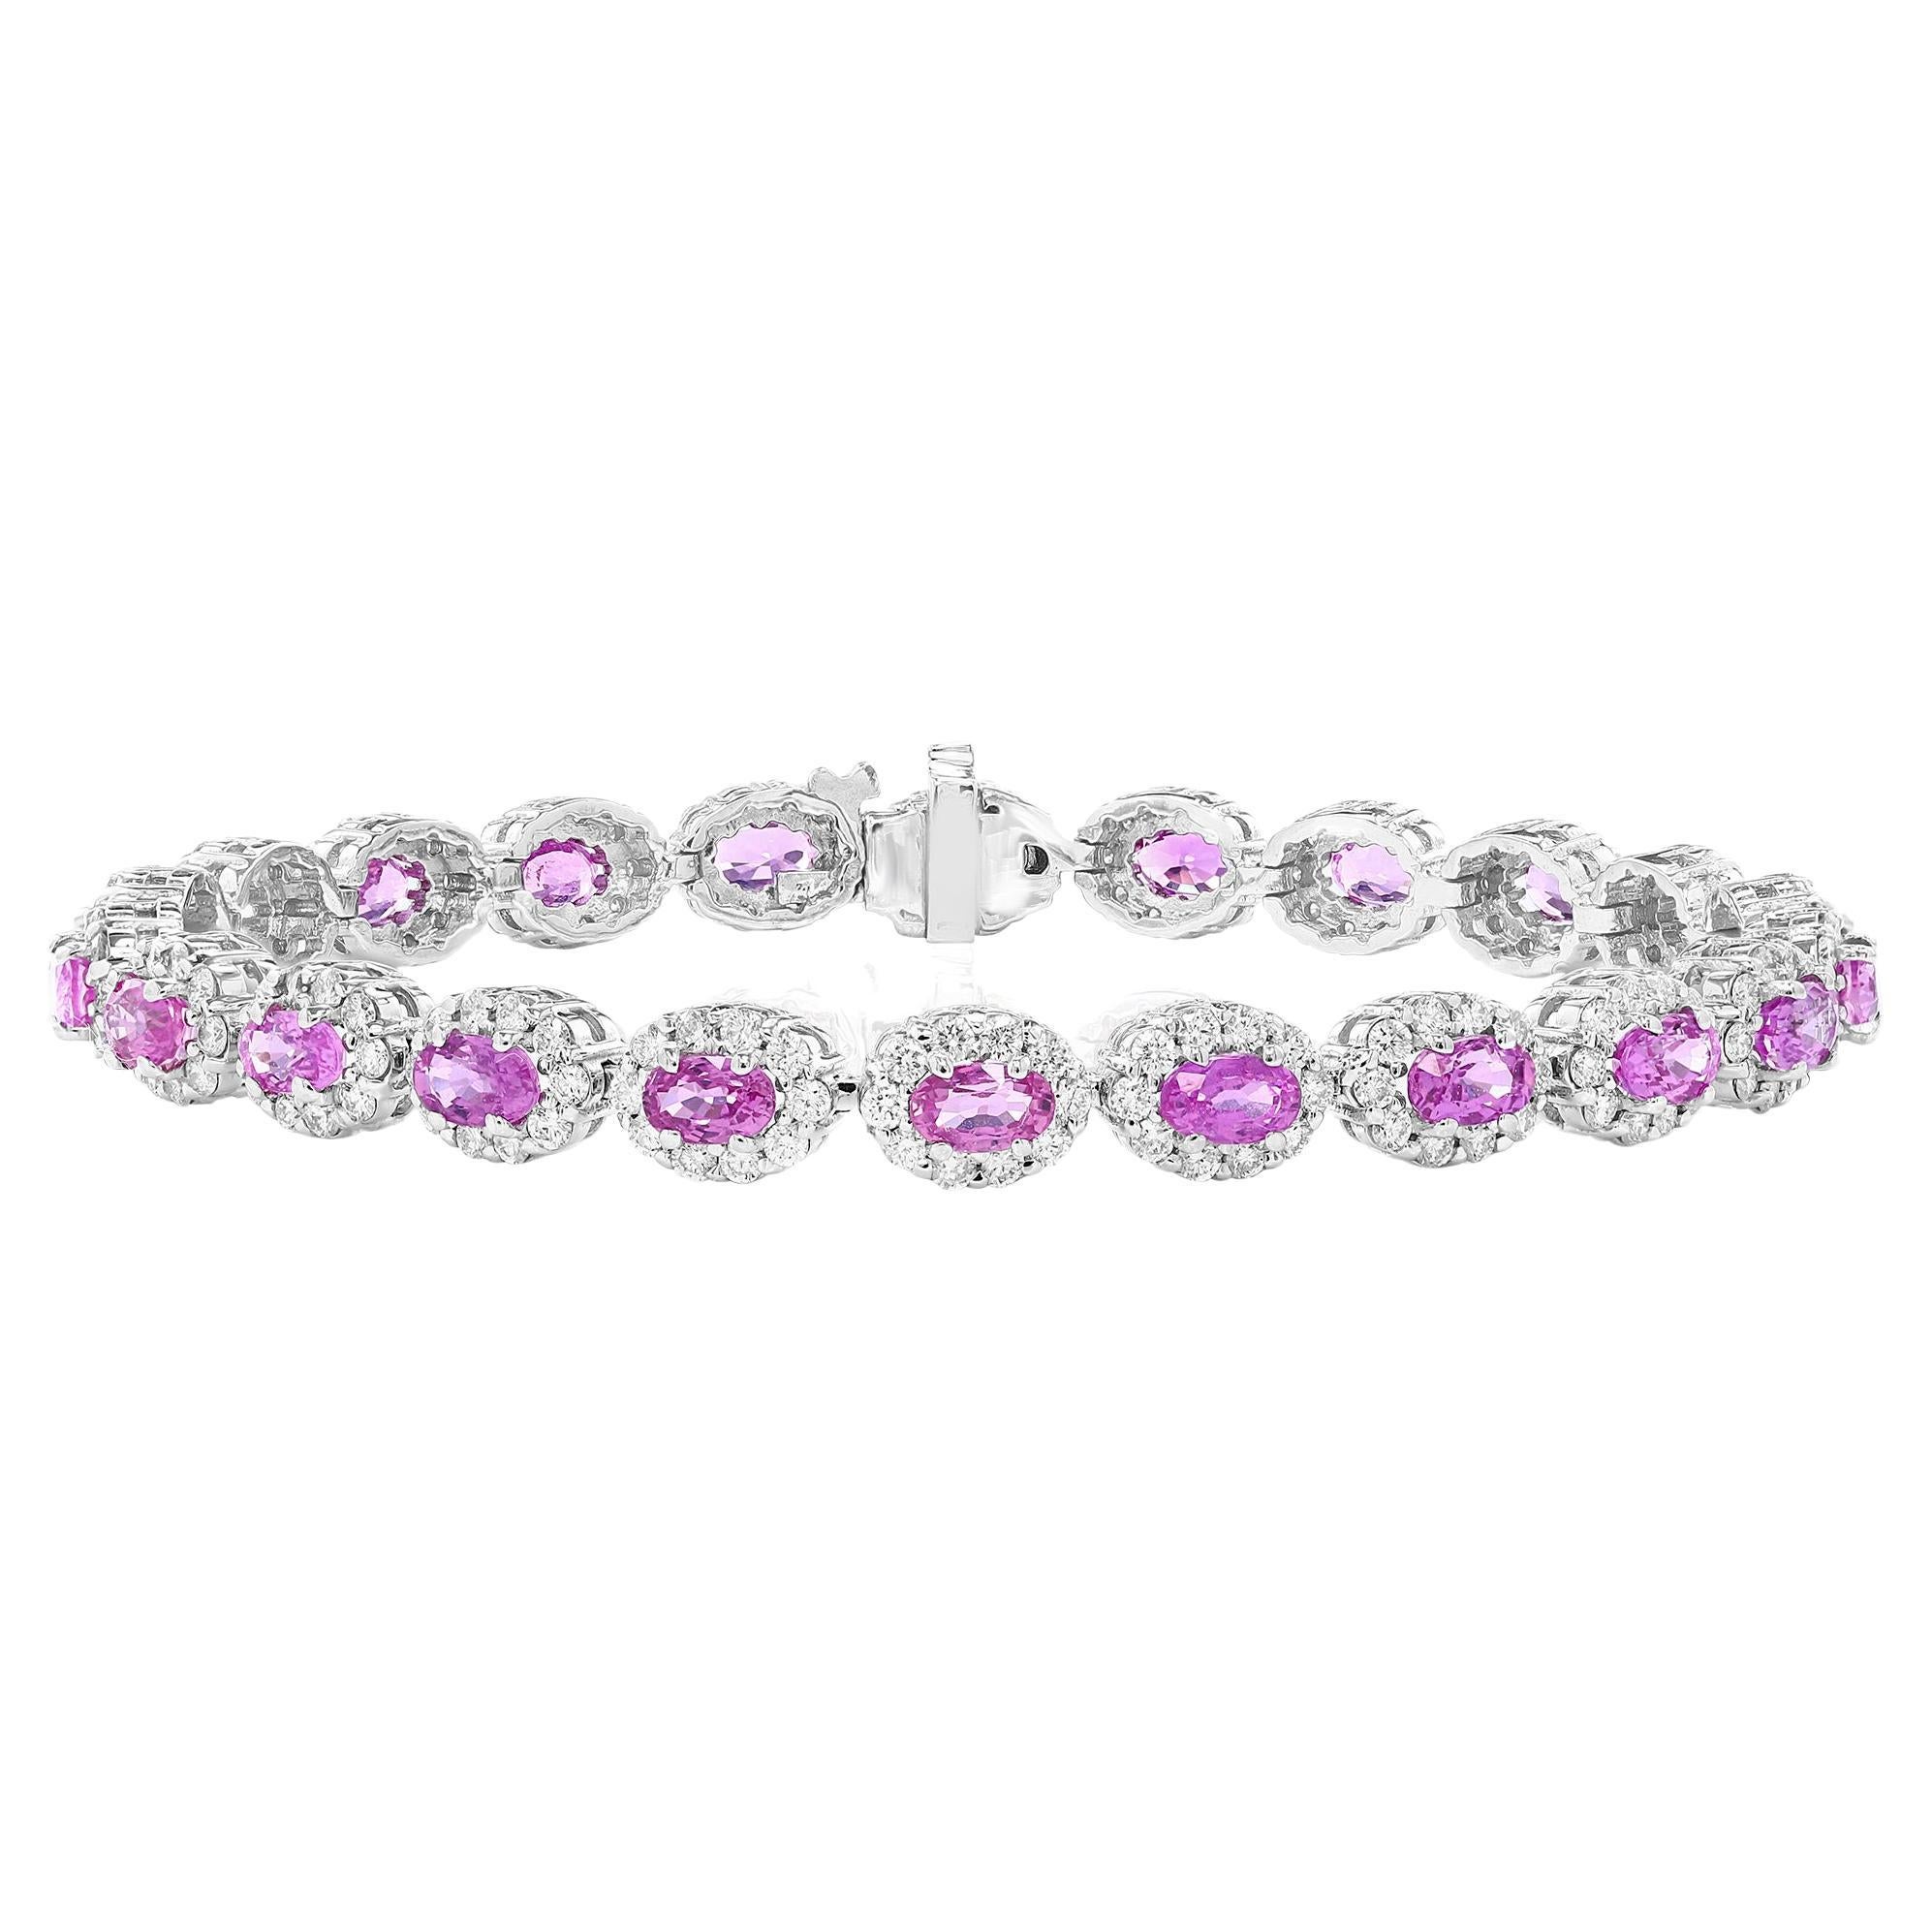 7.21 Carat Oval Cut Pink Sapphire and Diamond Halo Bracelet in 14K White Gold